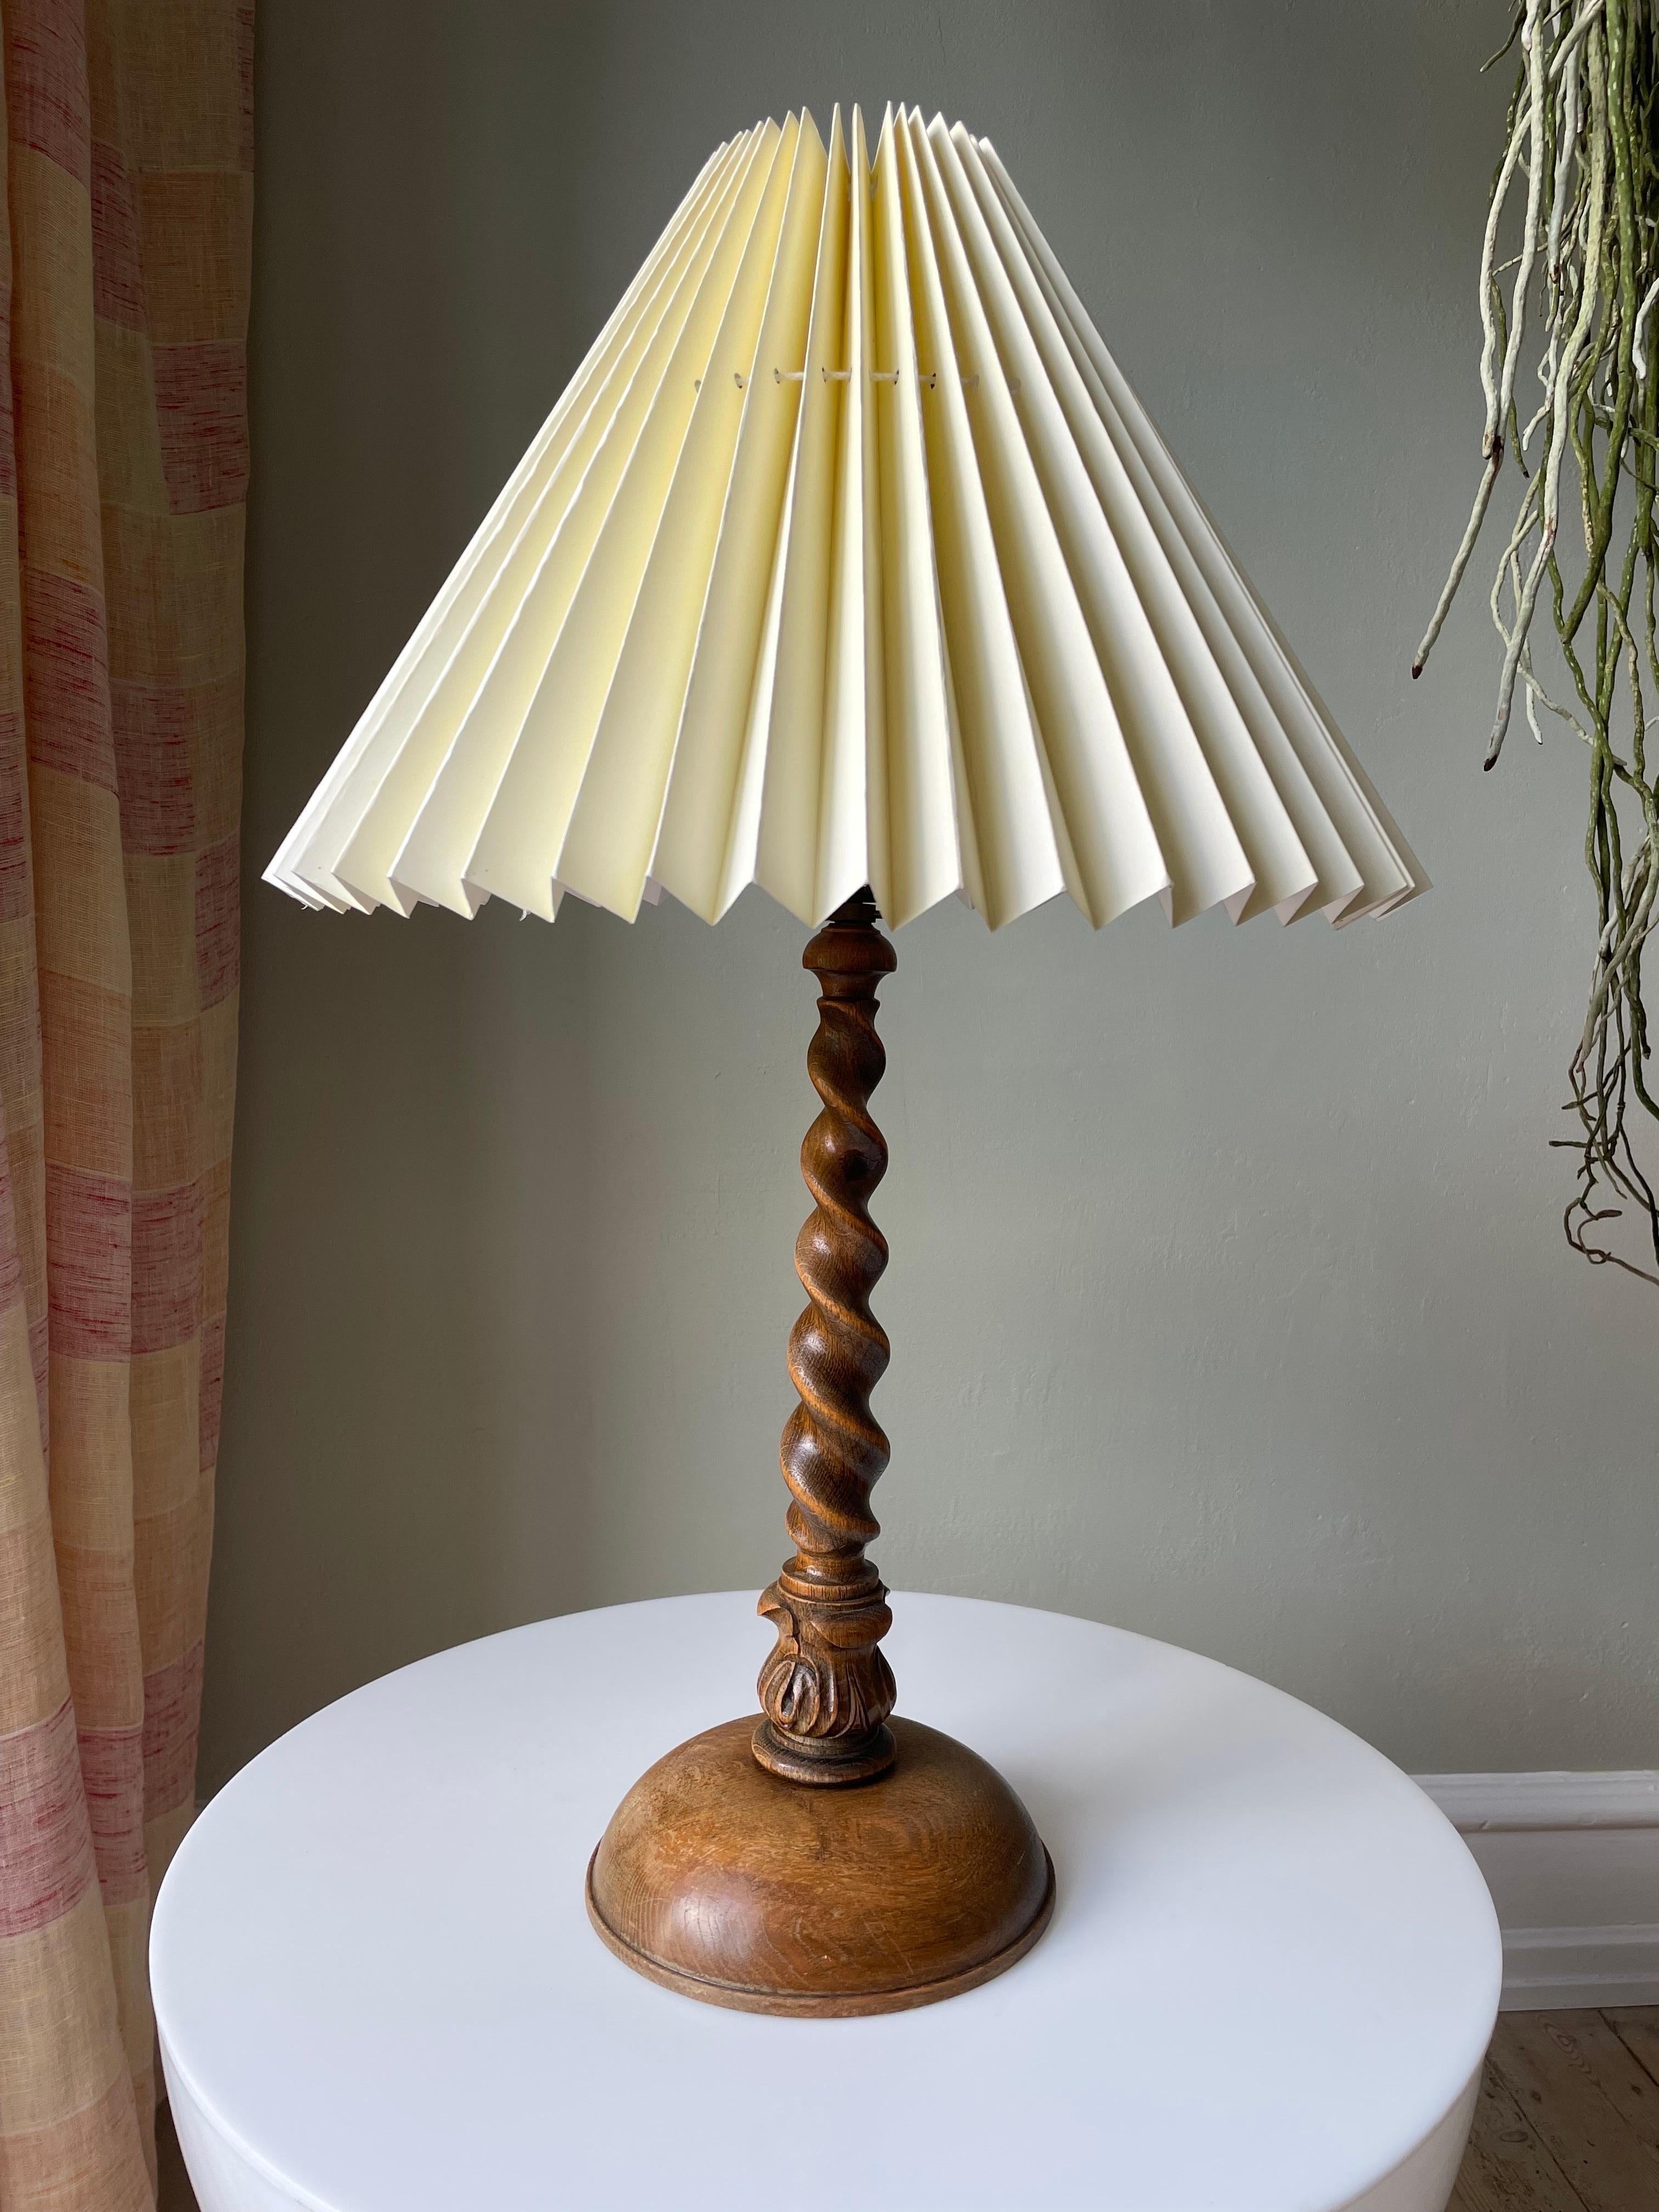 Large handcarved midcentury wooden table lamp. Clear lacquered swirling slender neck with intricate carved decor at the base and rounded foot. Original black fitting with switch and brass shade holder. Shade not included. Beautiful vintage